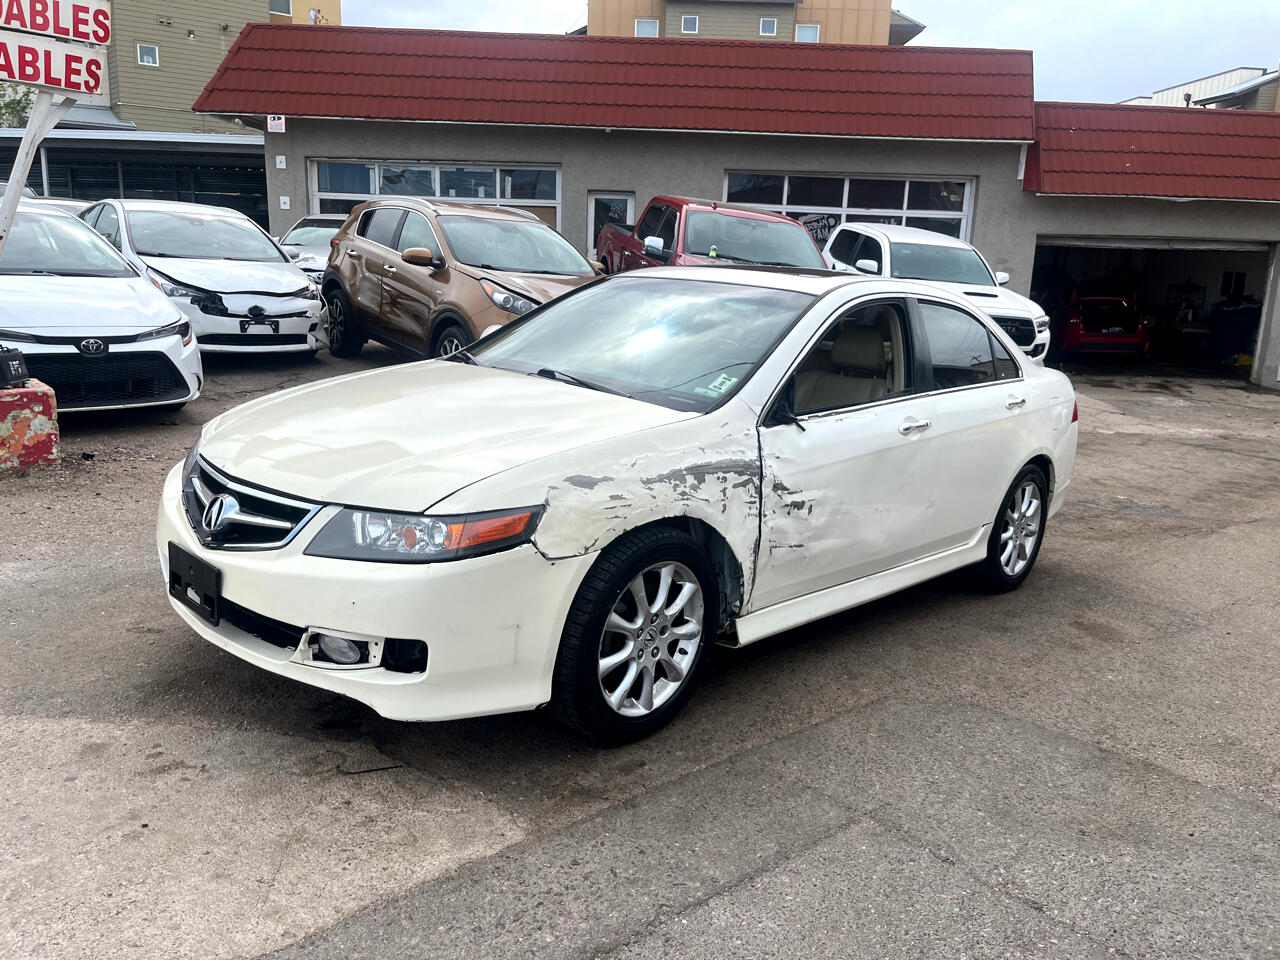 Used 2007 Acura TSX  with VIN JH4CL96997C002318 for sale in Denver, CO